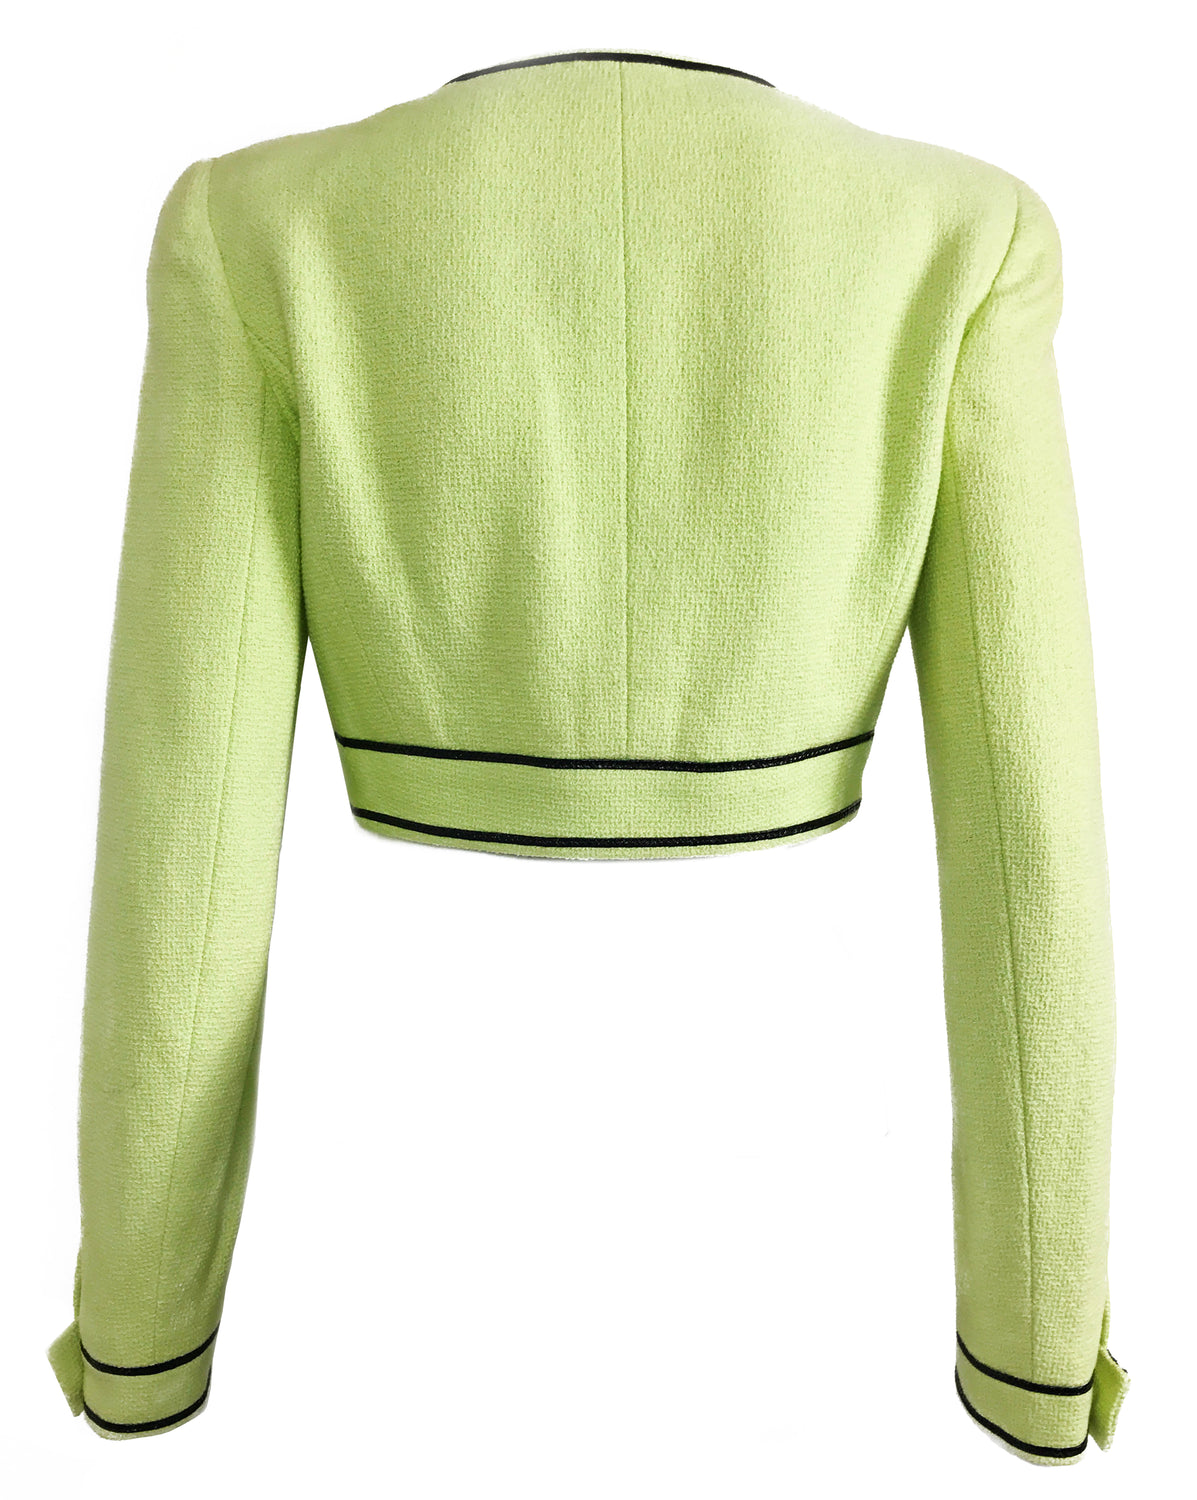 FRUIT Vintage Chanel iconic 1995 Green Boucle Cropped Jacket Karl Lagerfeld